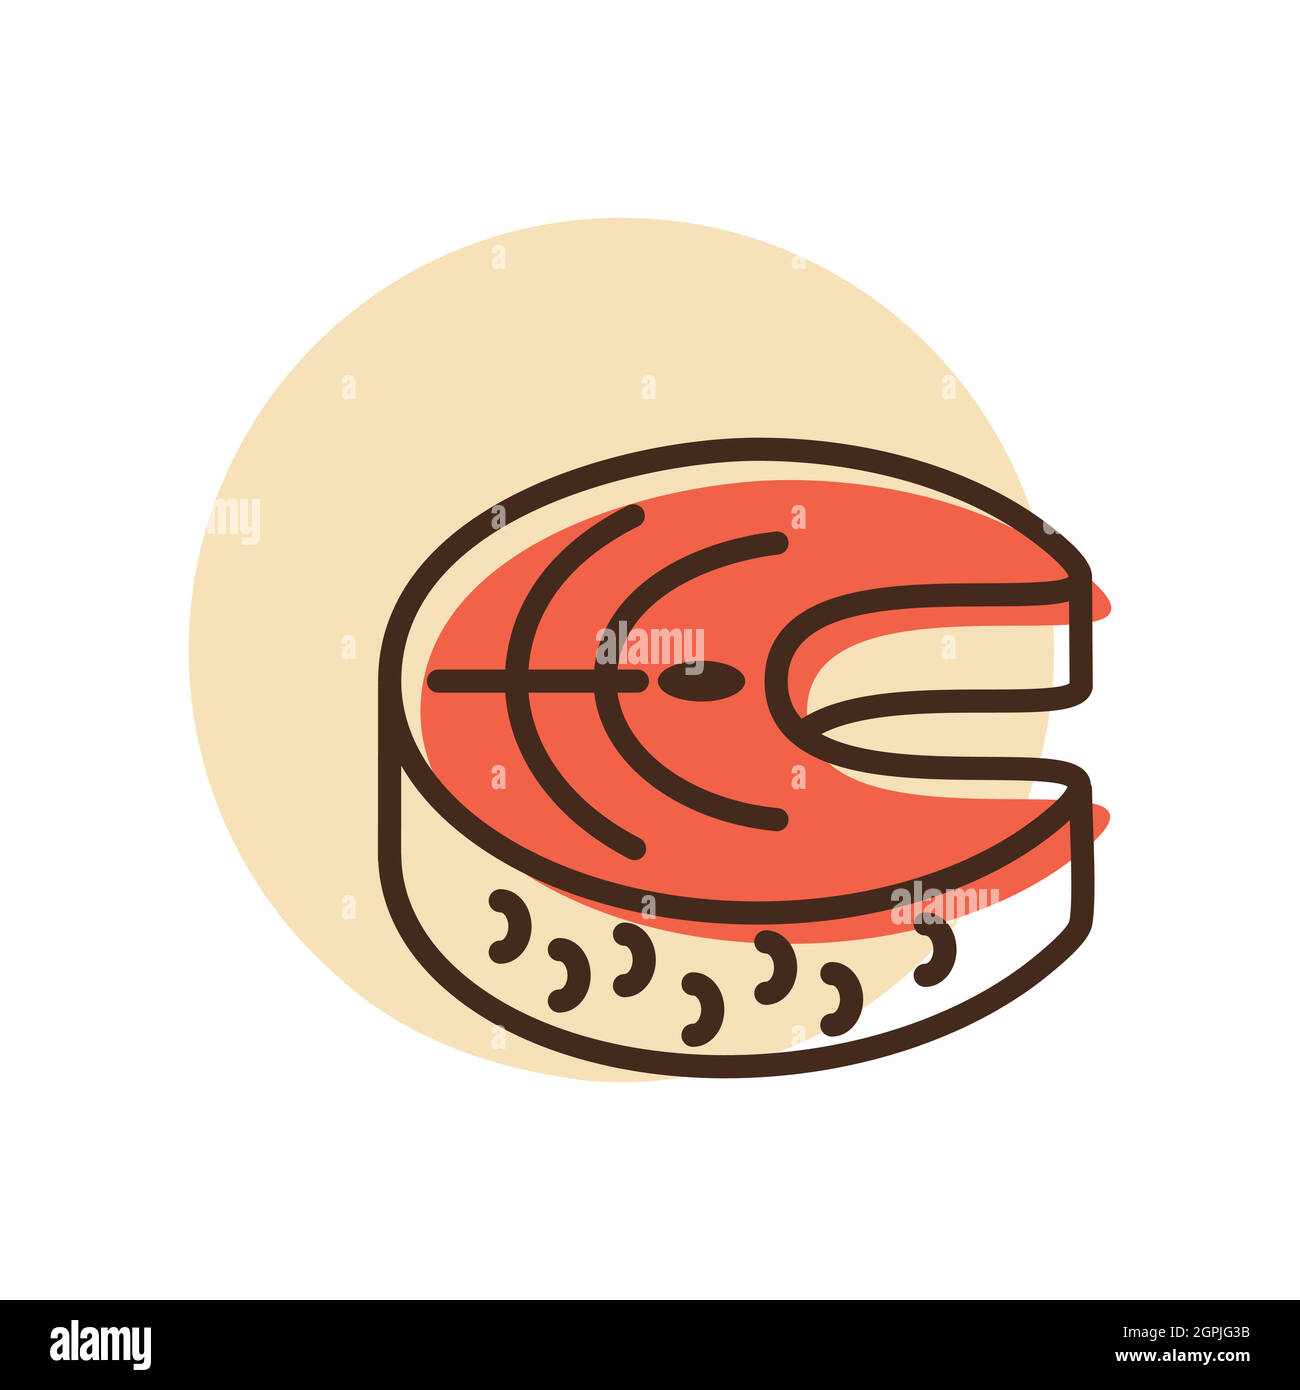 Steak of red fish salmon vector icon Stock Vector